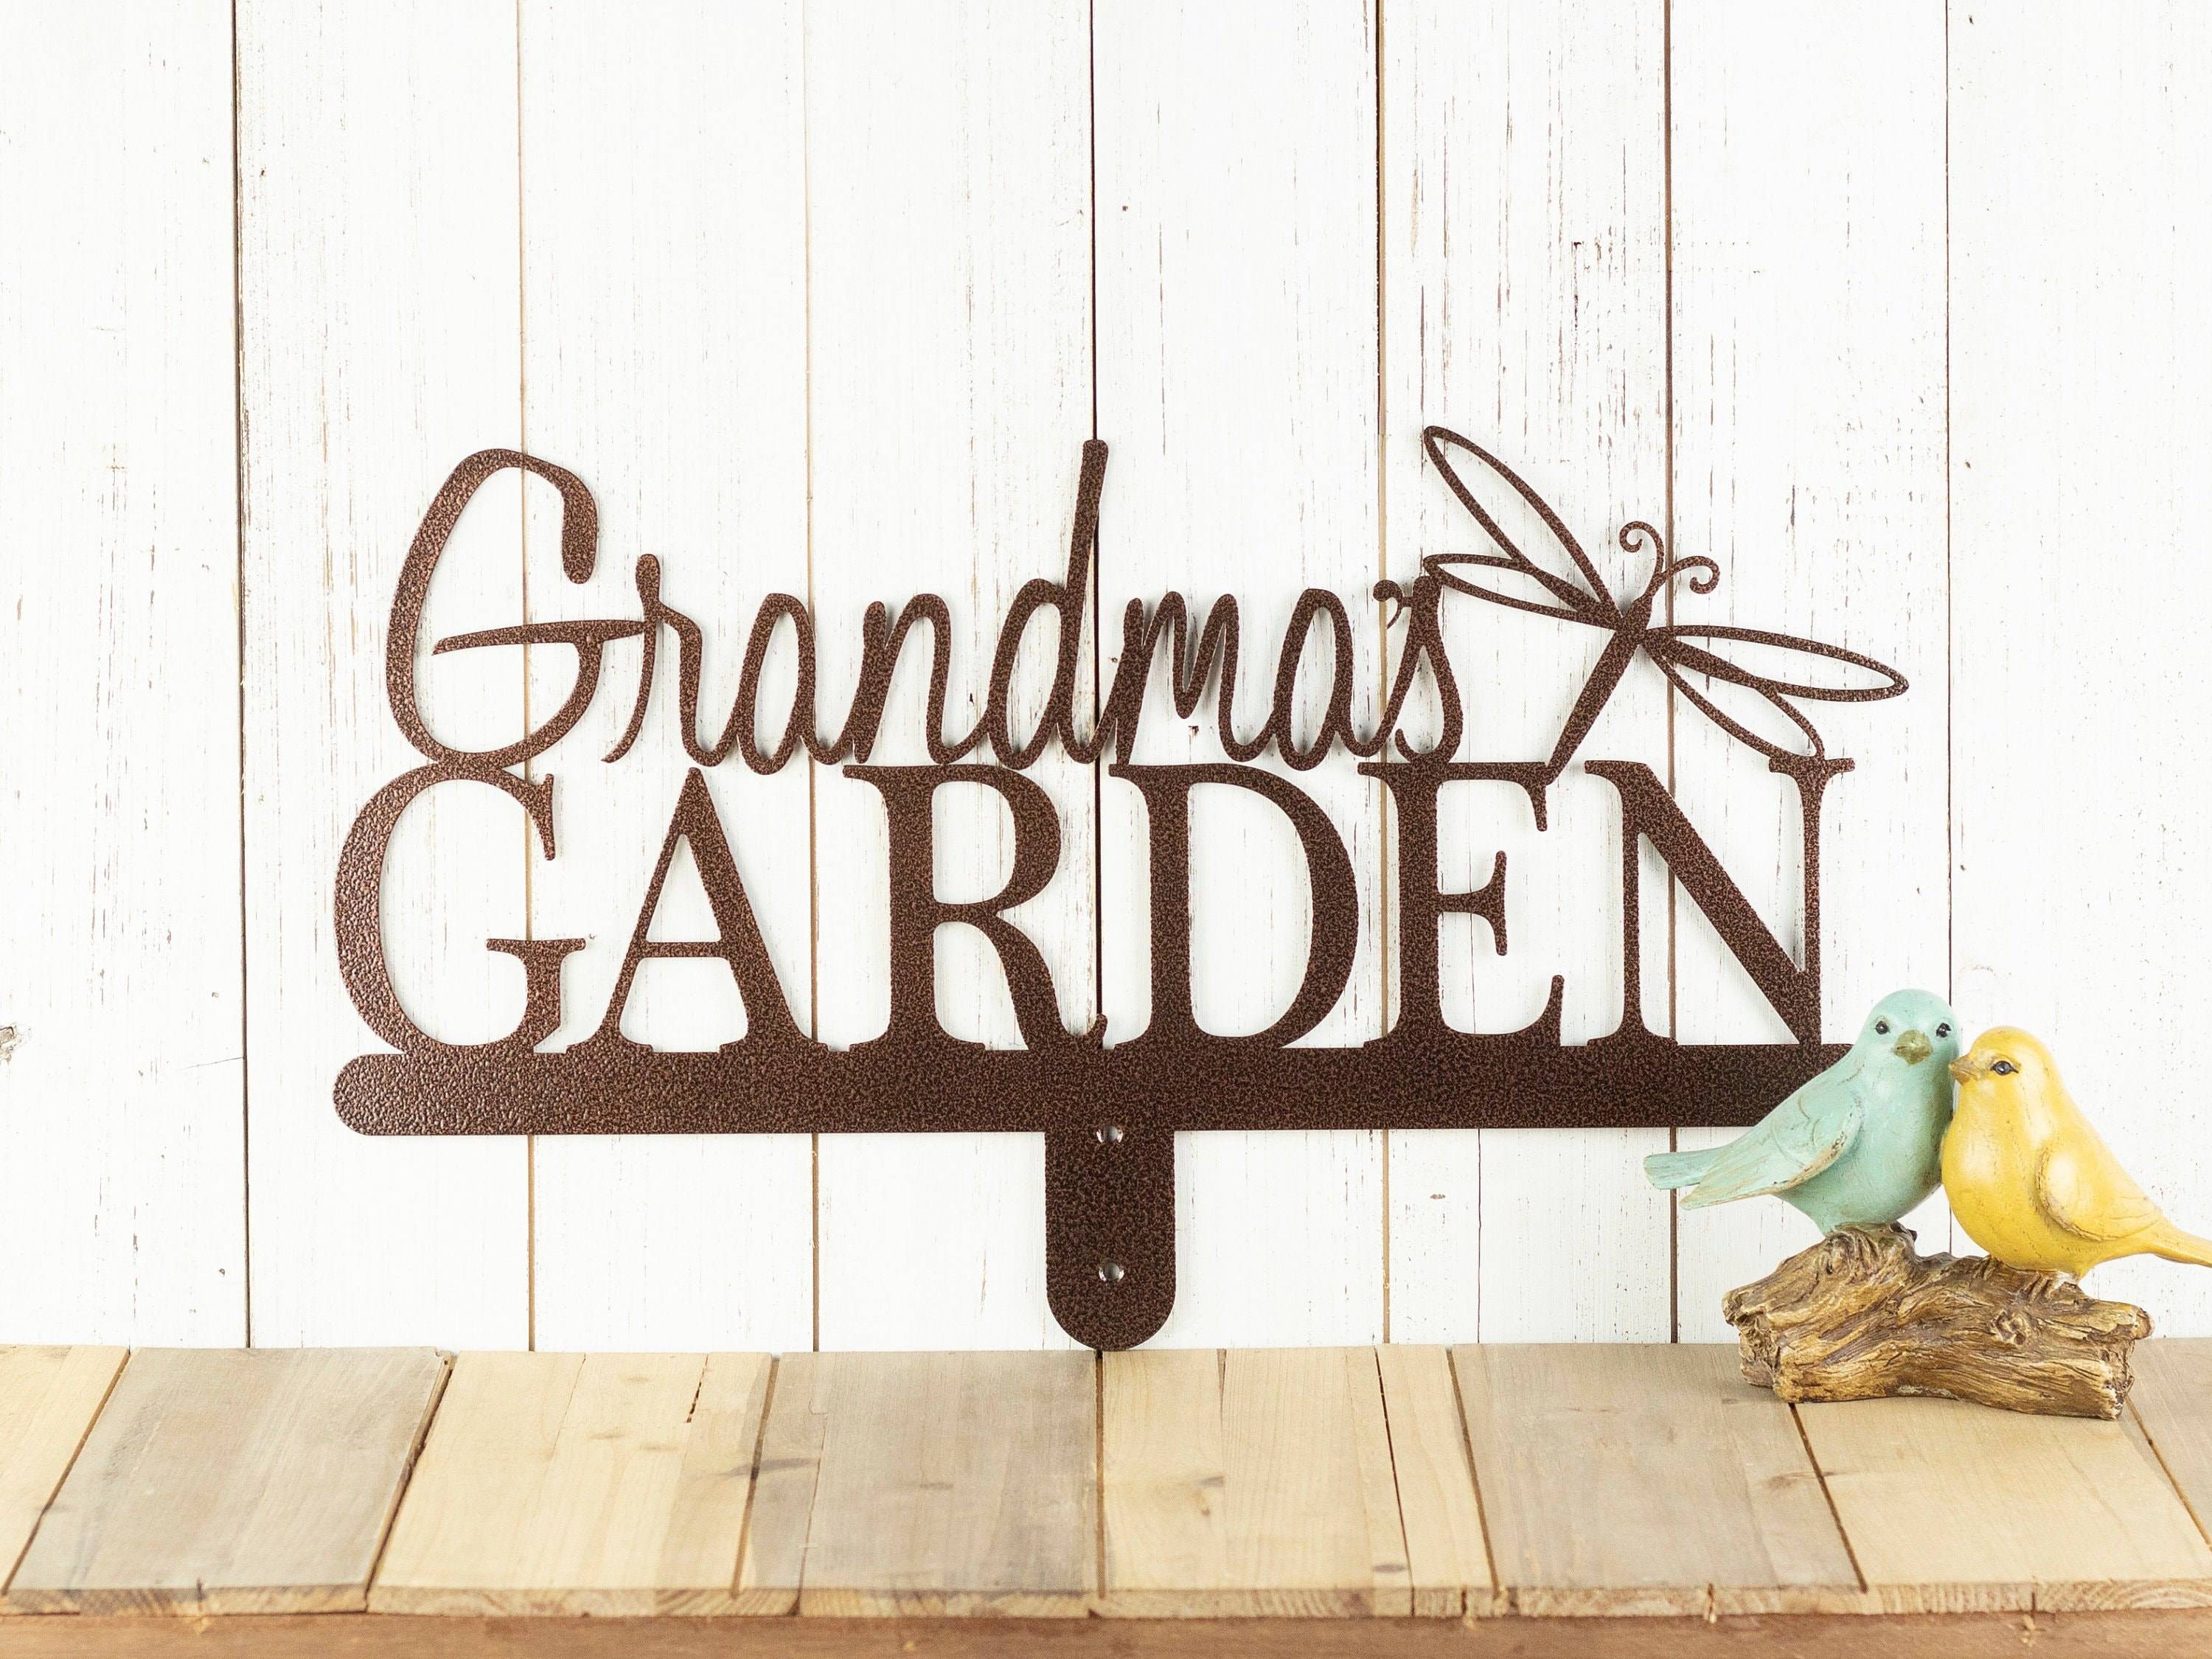 Yard Signs Personalized Garden